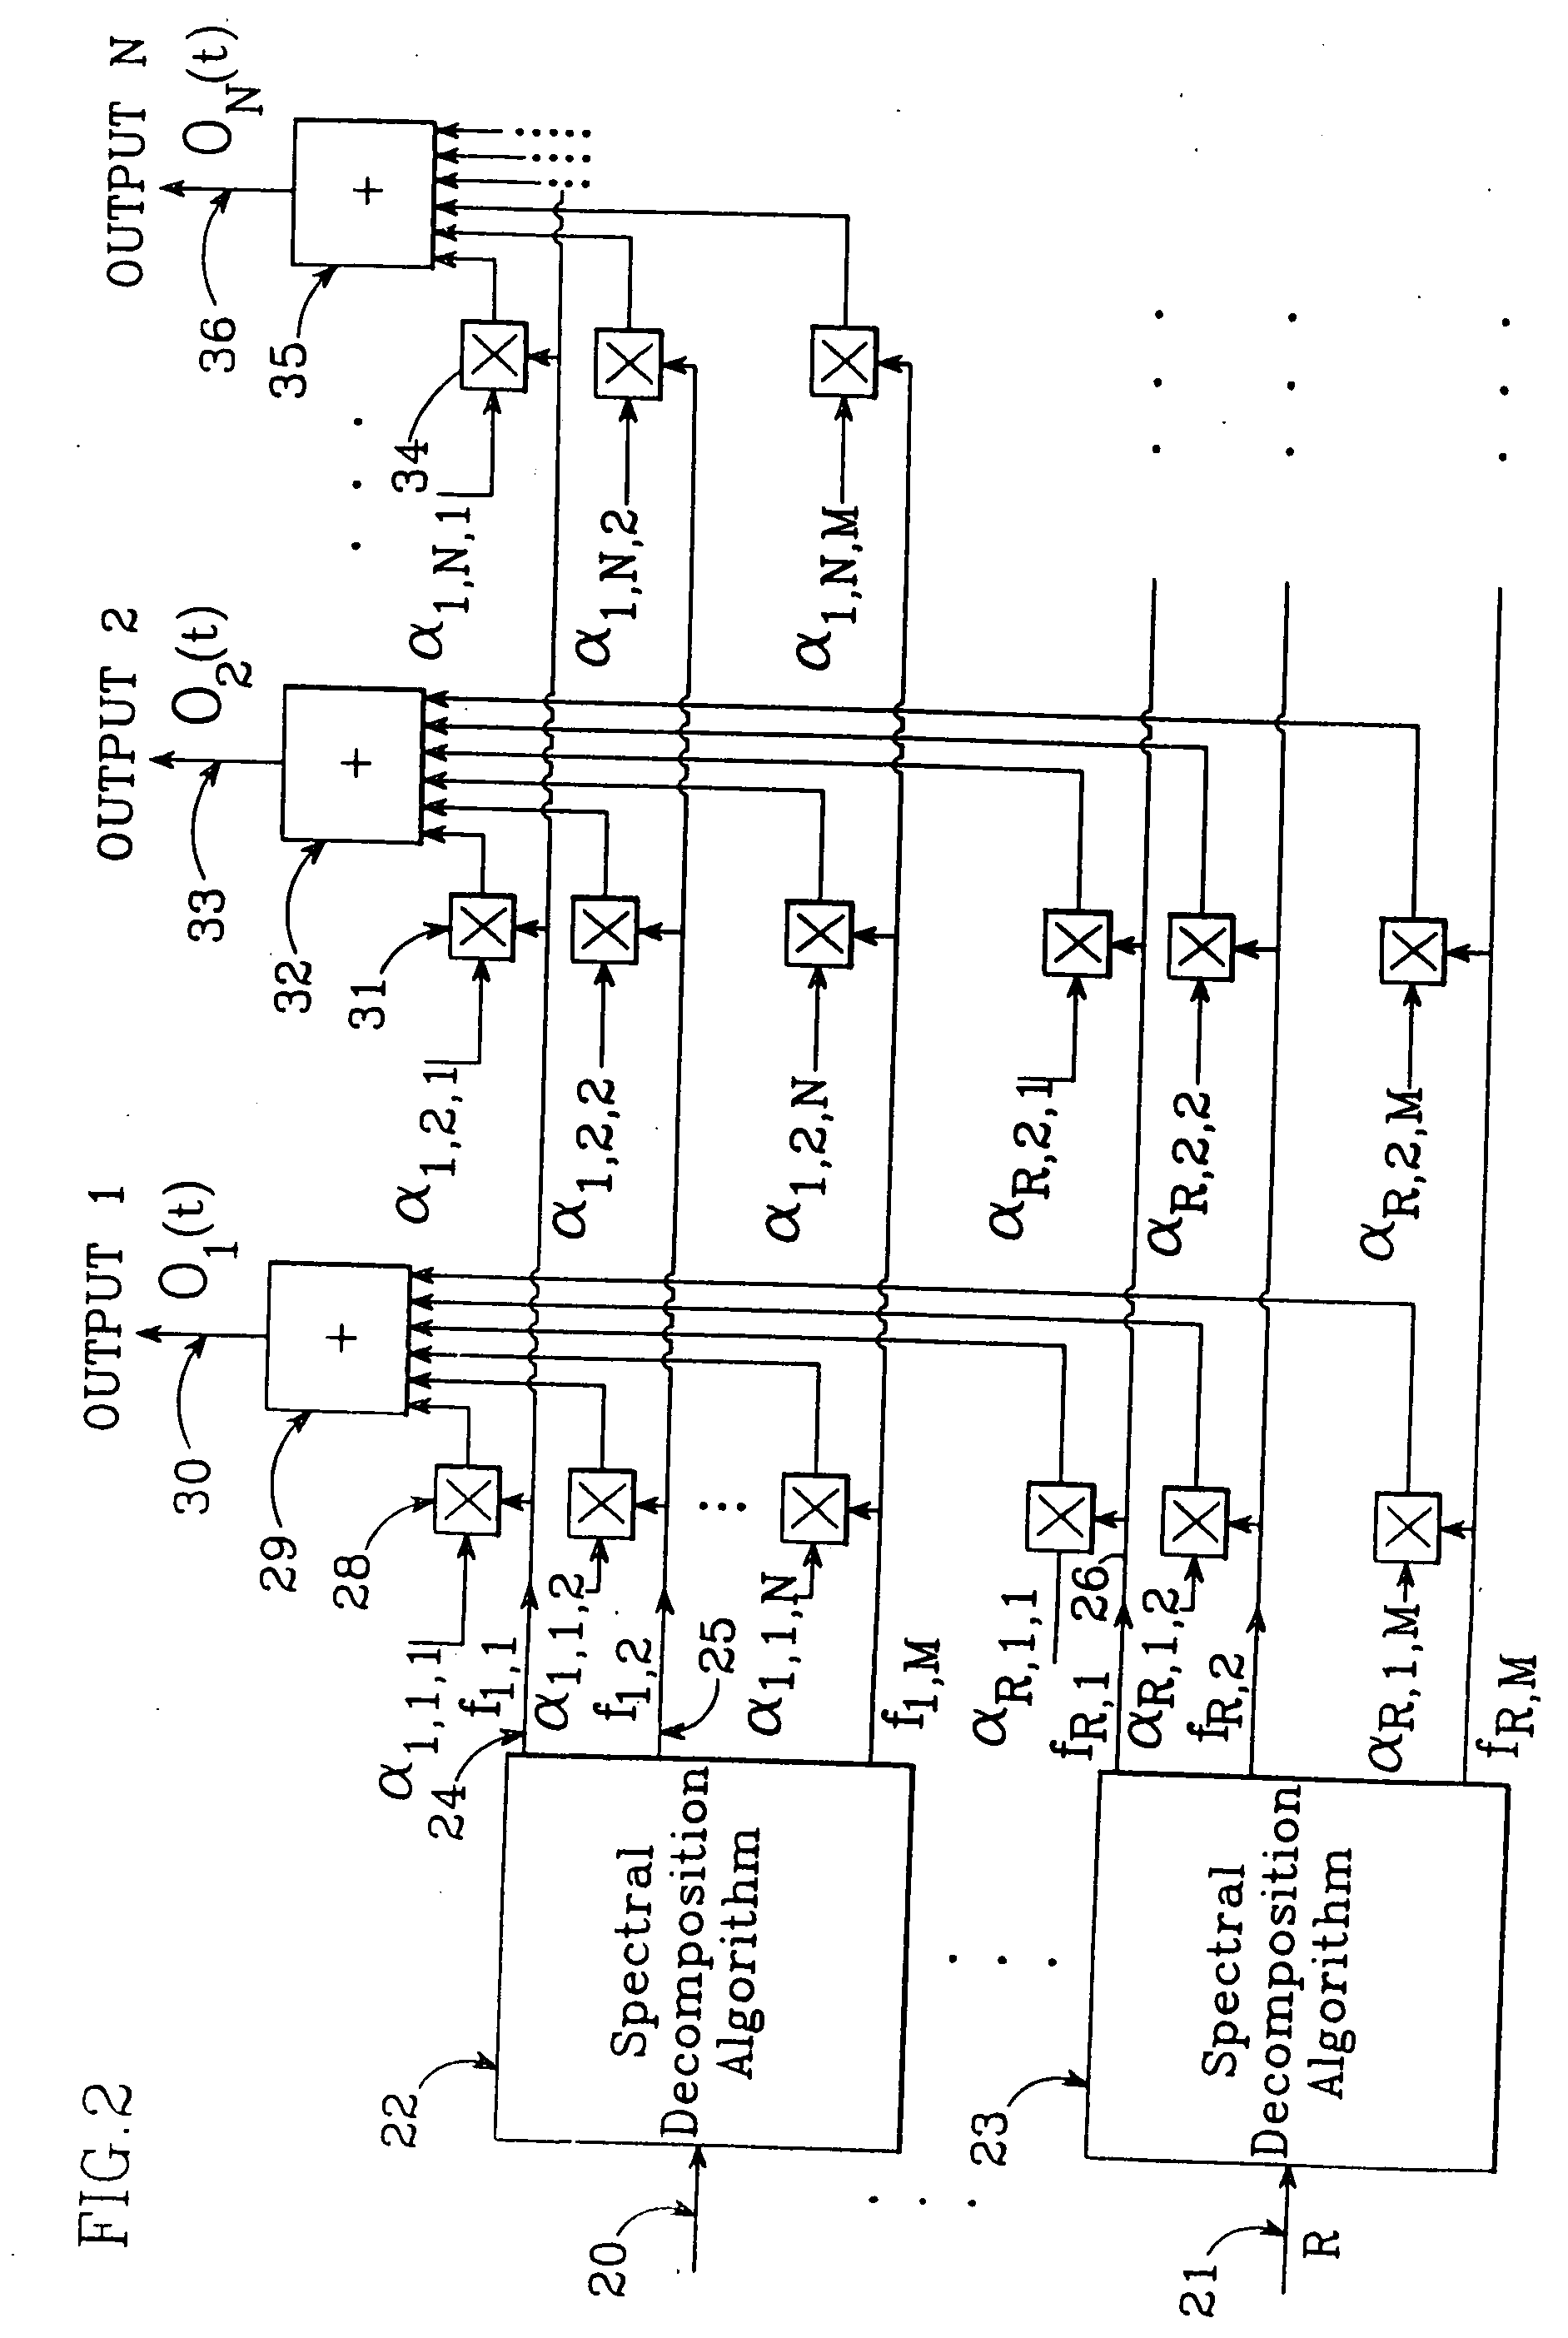 Multichannel spectral vector mapping audio apparatus and method